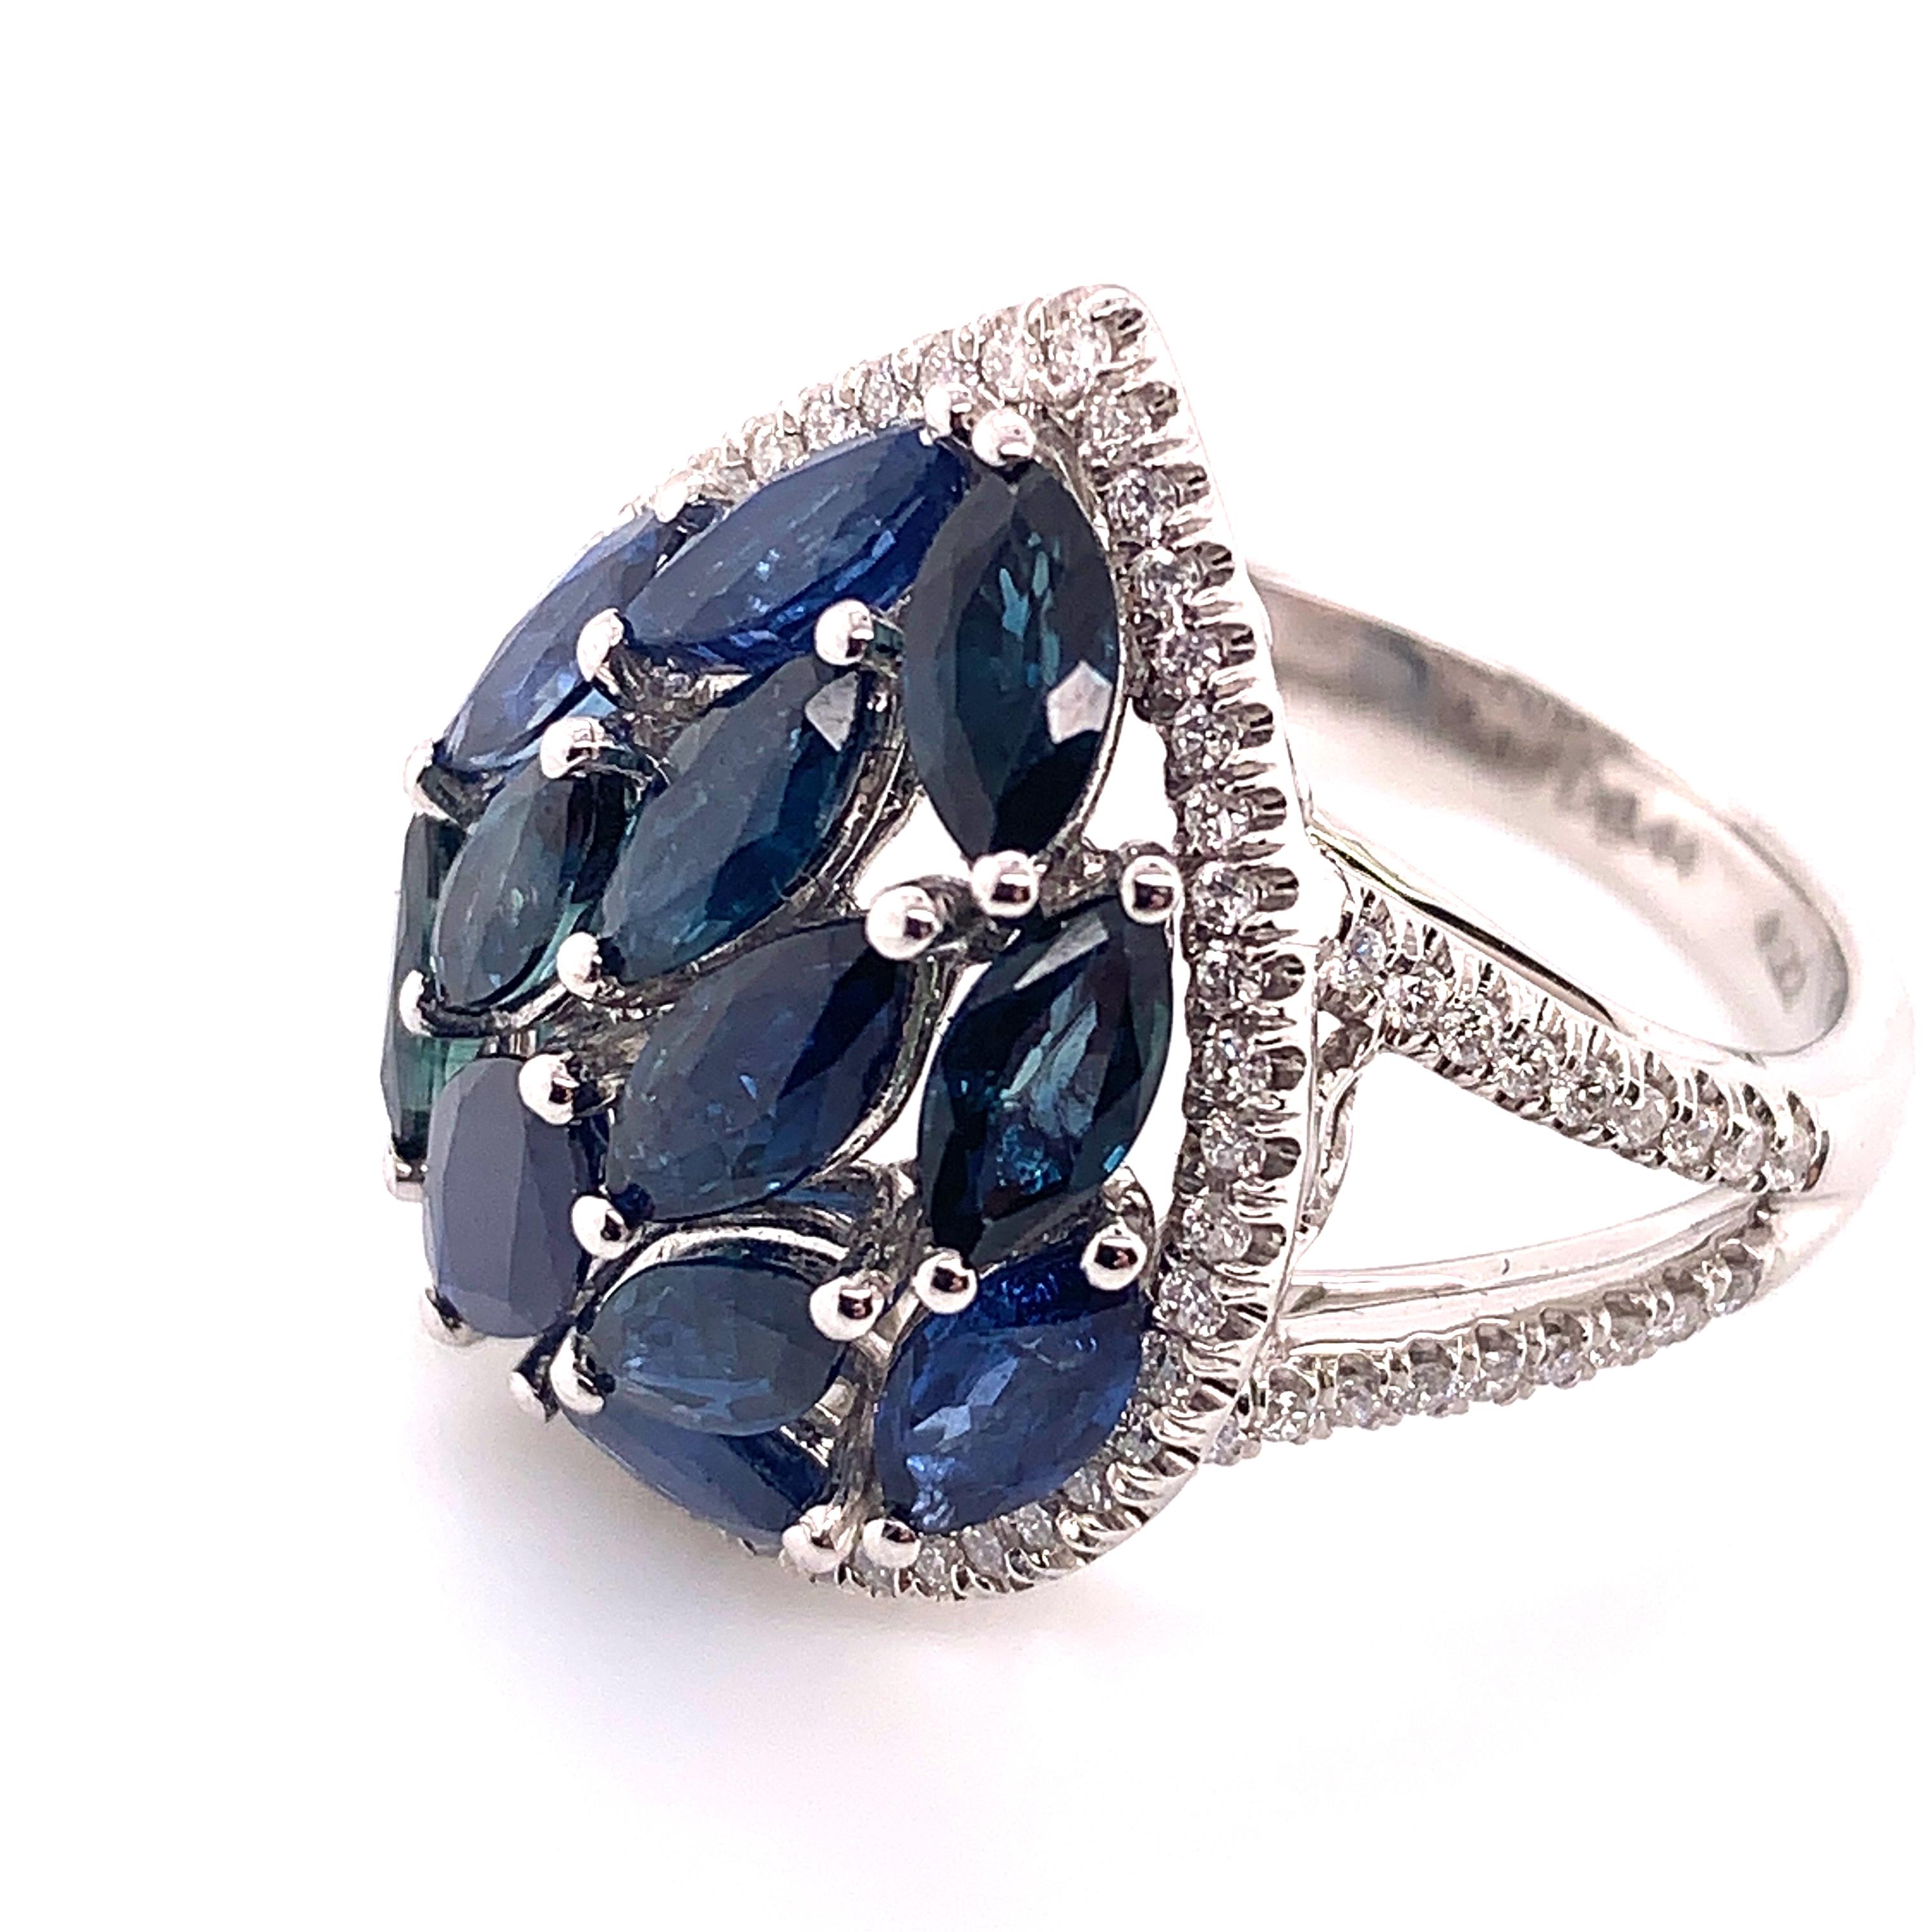 4.66 carat blue sapphire and diamond ring made by Shimon's Creations is set with 18K white gold and and centered by 4.22 carat marquise cut sapphires featuring beautiful strong blue colors and flashes of turquoise. Along the rest of the ring are